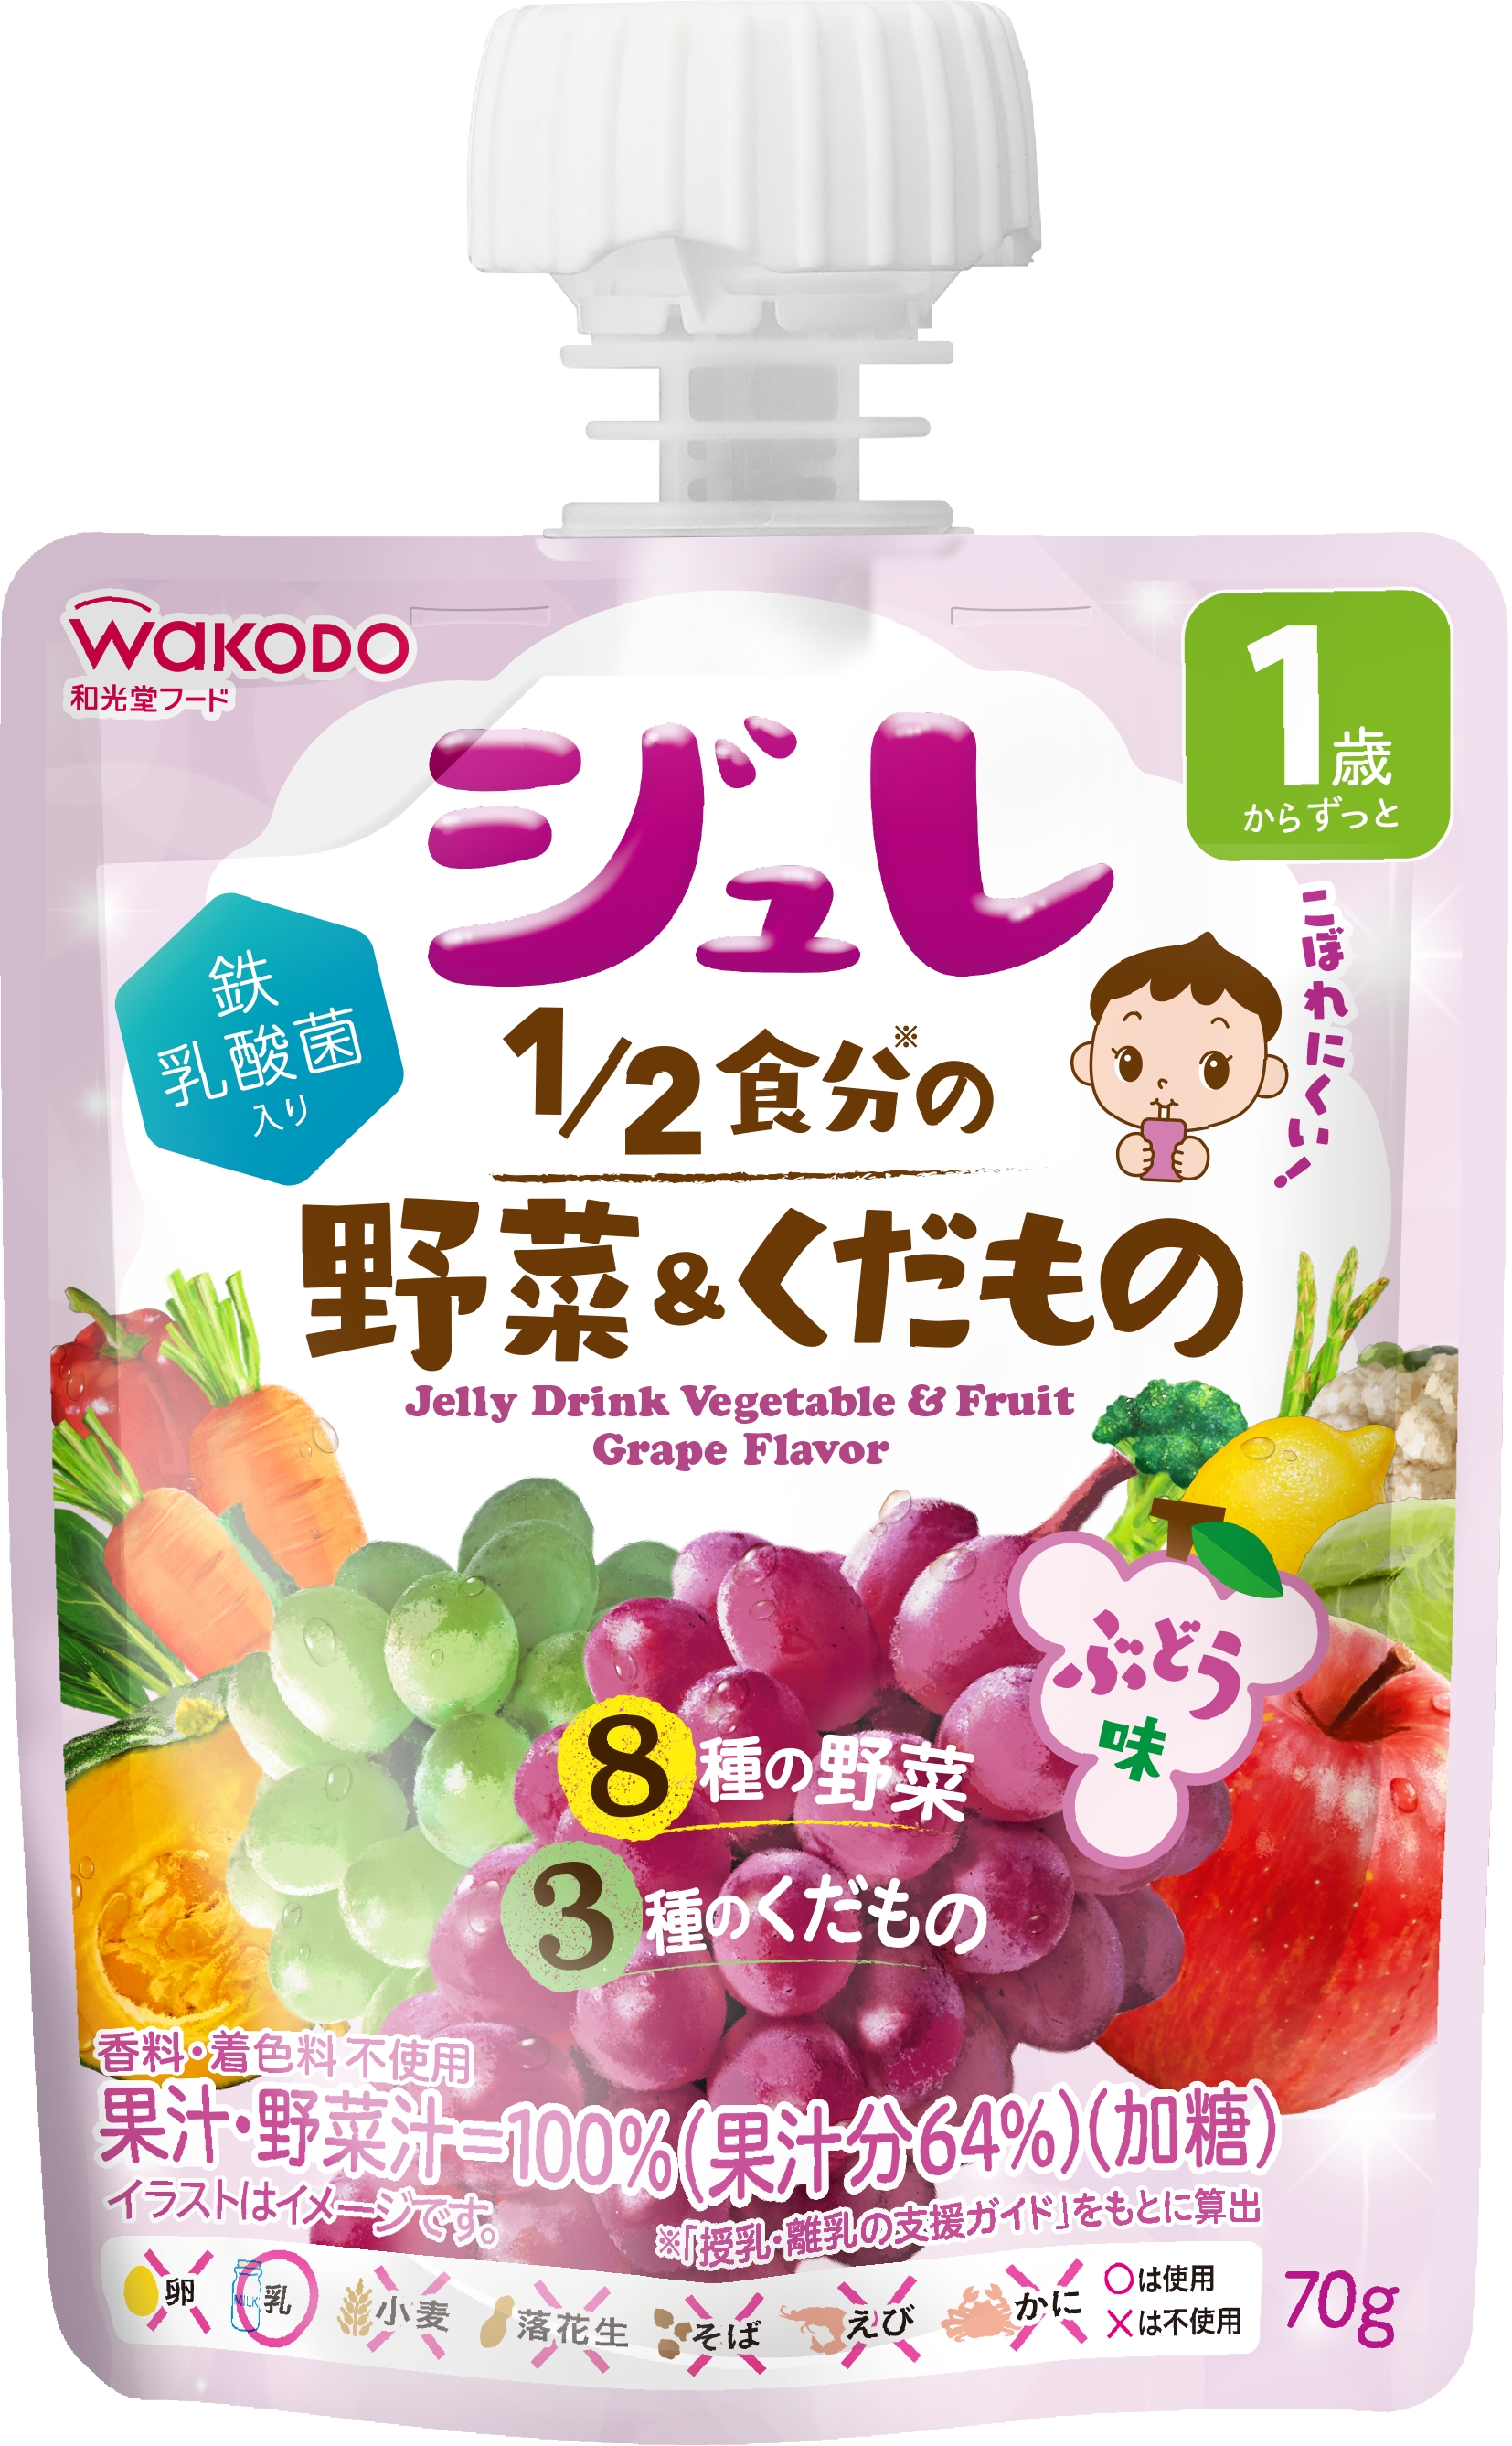 Wakodo My Jelly Drink Vegetable And Grape Flavour (Bundle of 6)